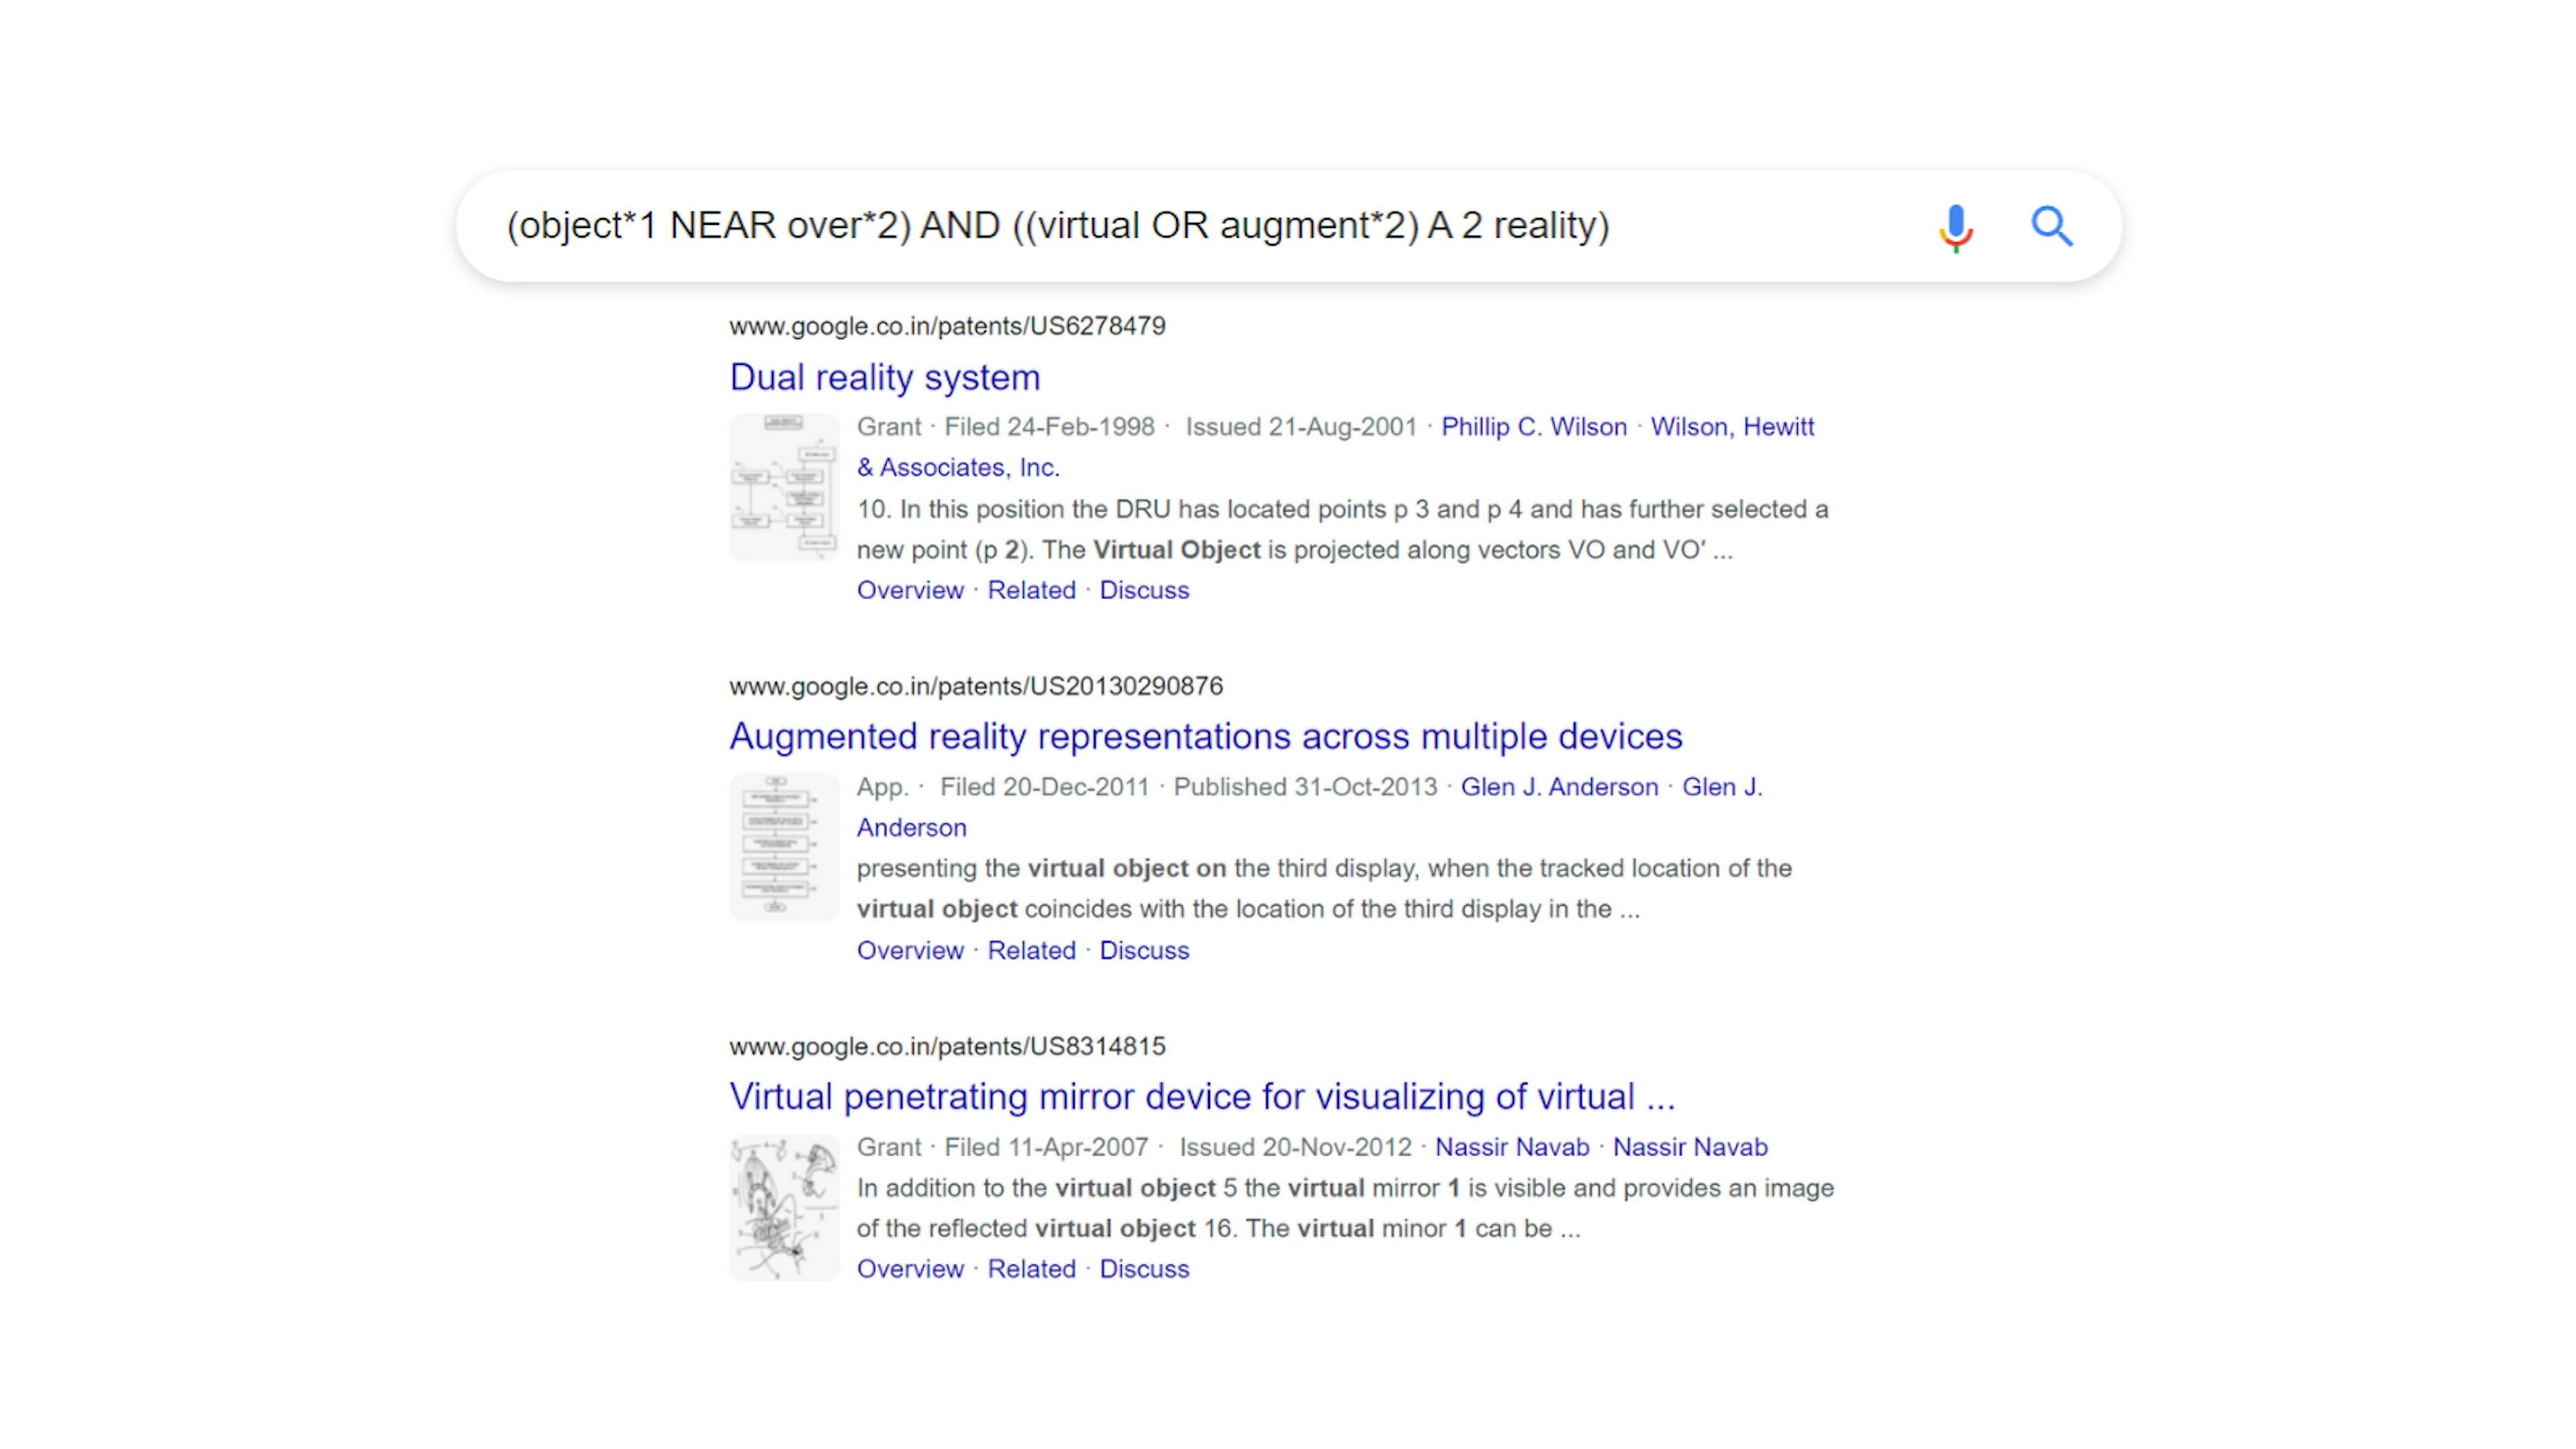 Searching for prior art on Google Patents